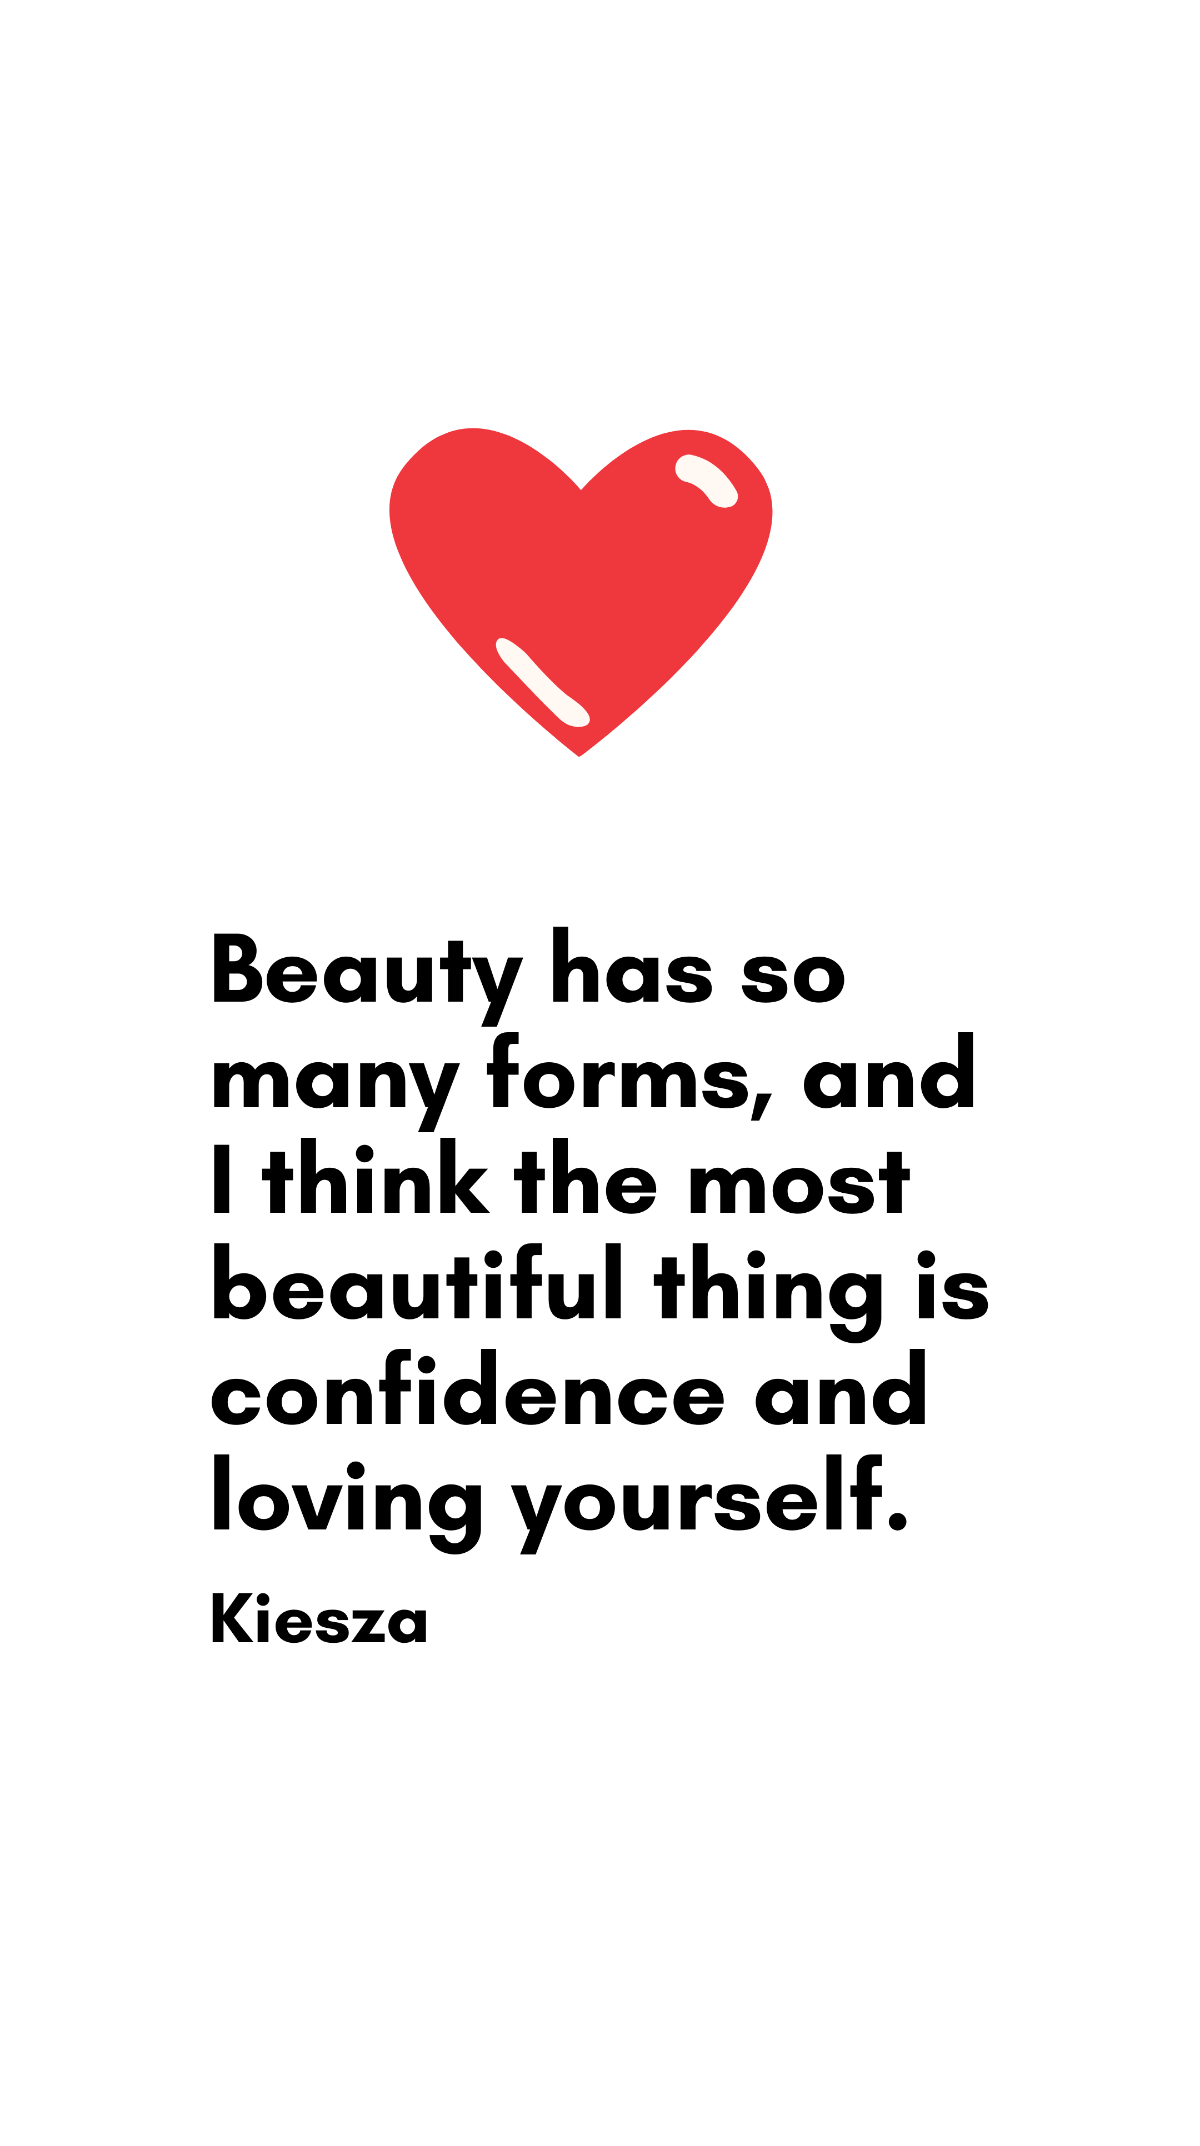 Kiesza - Beauty has so many forms, and I think the most beautiful thing is confidence and loving yourself. Template